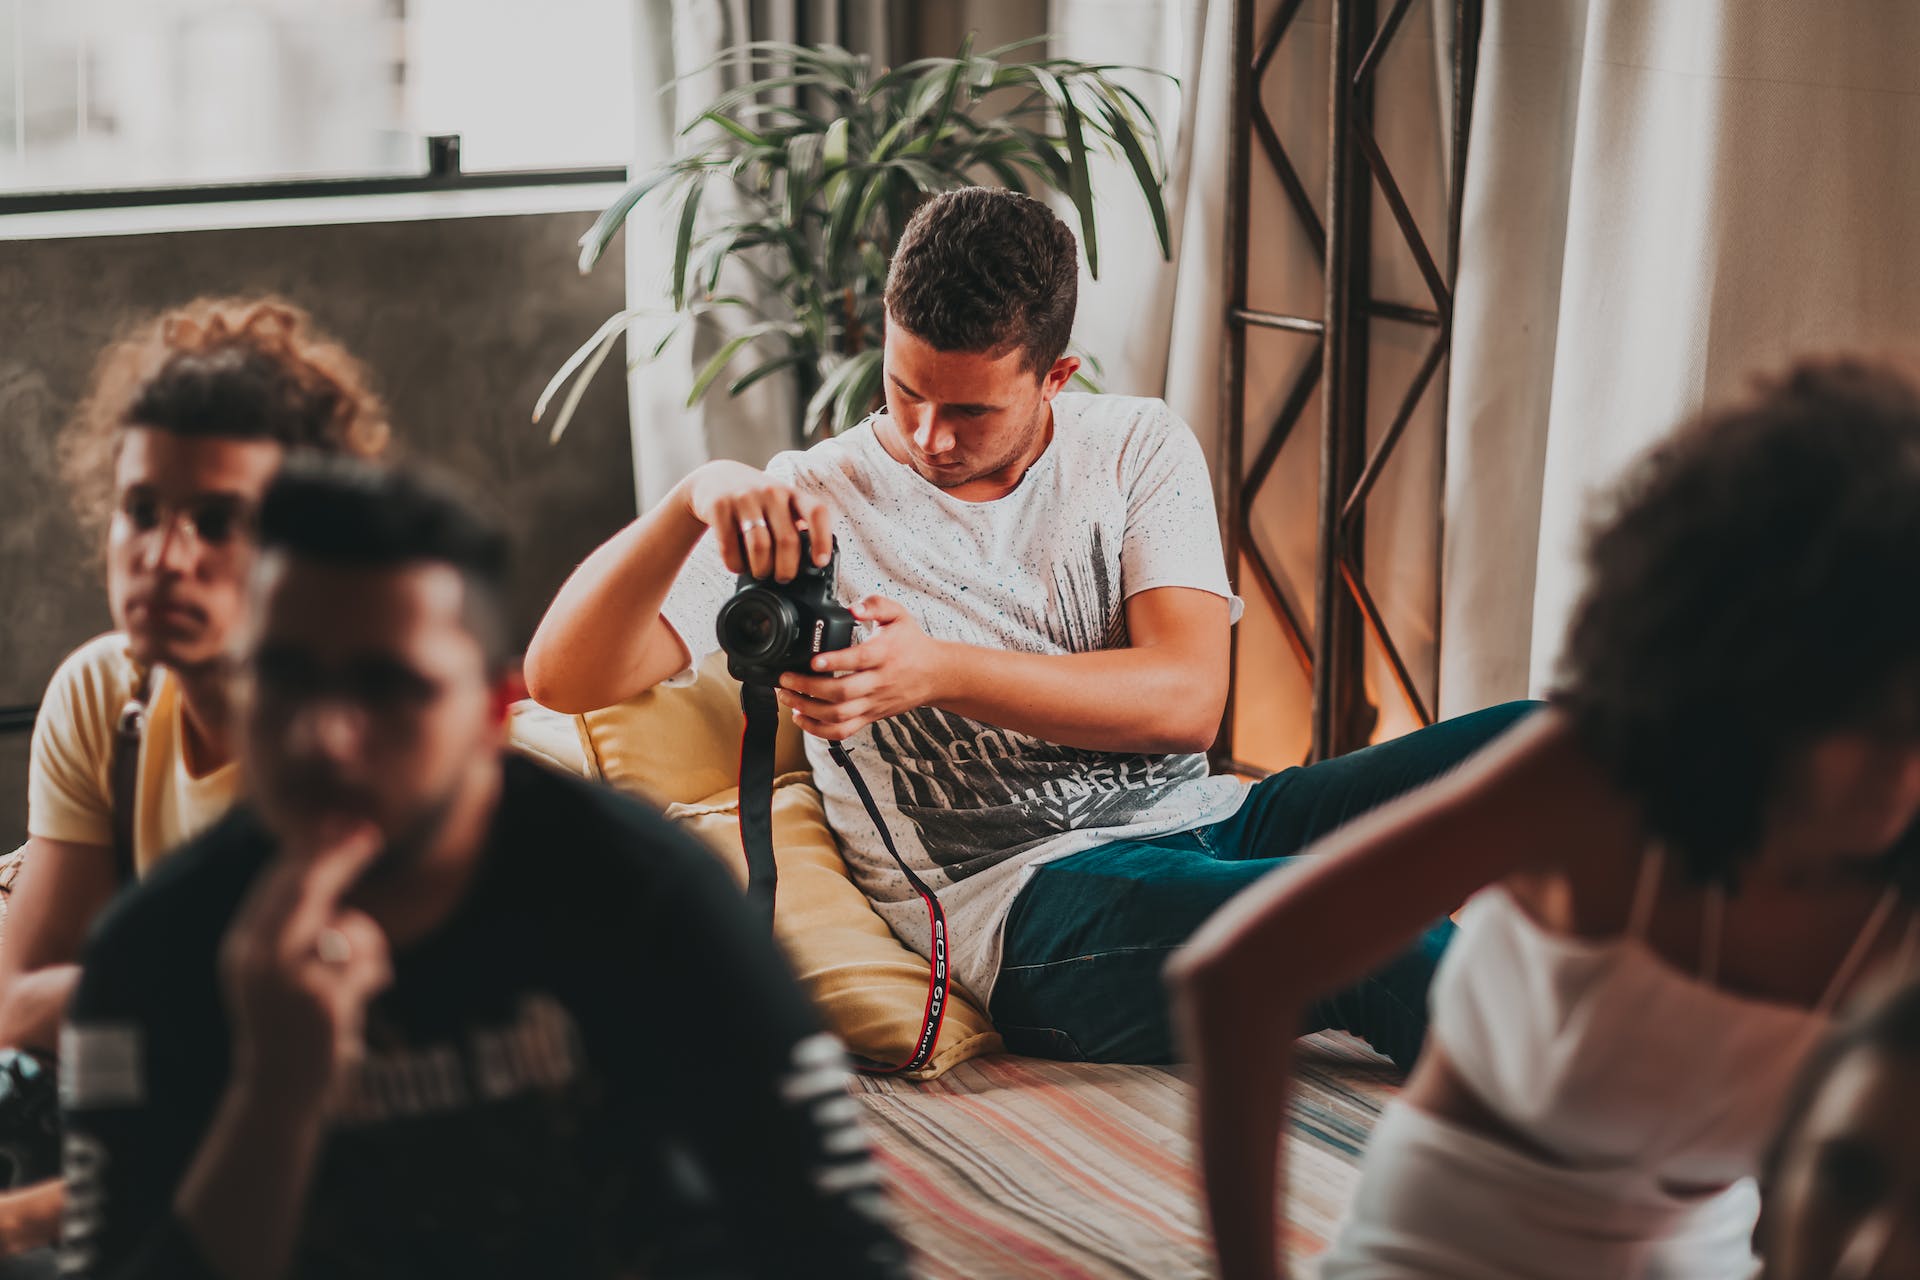 Group of young adults in a casual indoor setting, with one man intently focusing on a camera in his hands. He is seated on a couch, reviewing his camera settings or captured images, oblivious to his friends blurred in the background. This moment captures the essence of dedication and concentration, a visual metaphor for the concept 'Likes Don't Pay,' highlighting the importance of substance and skill over mere social media validation.